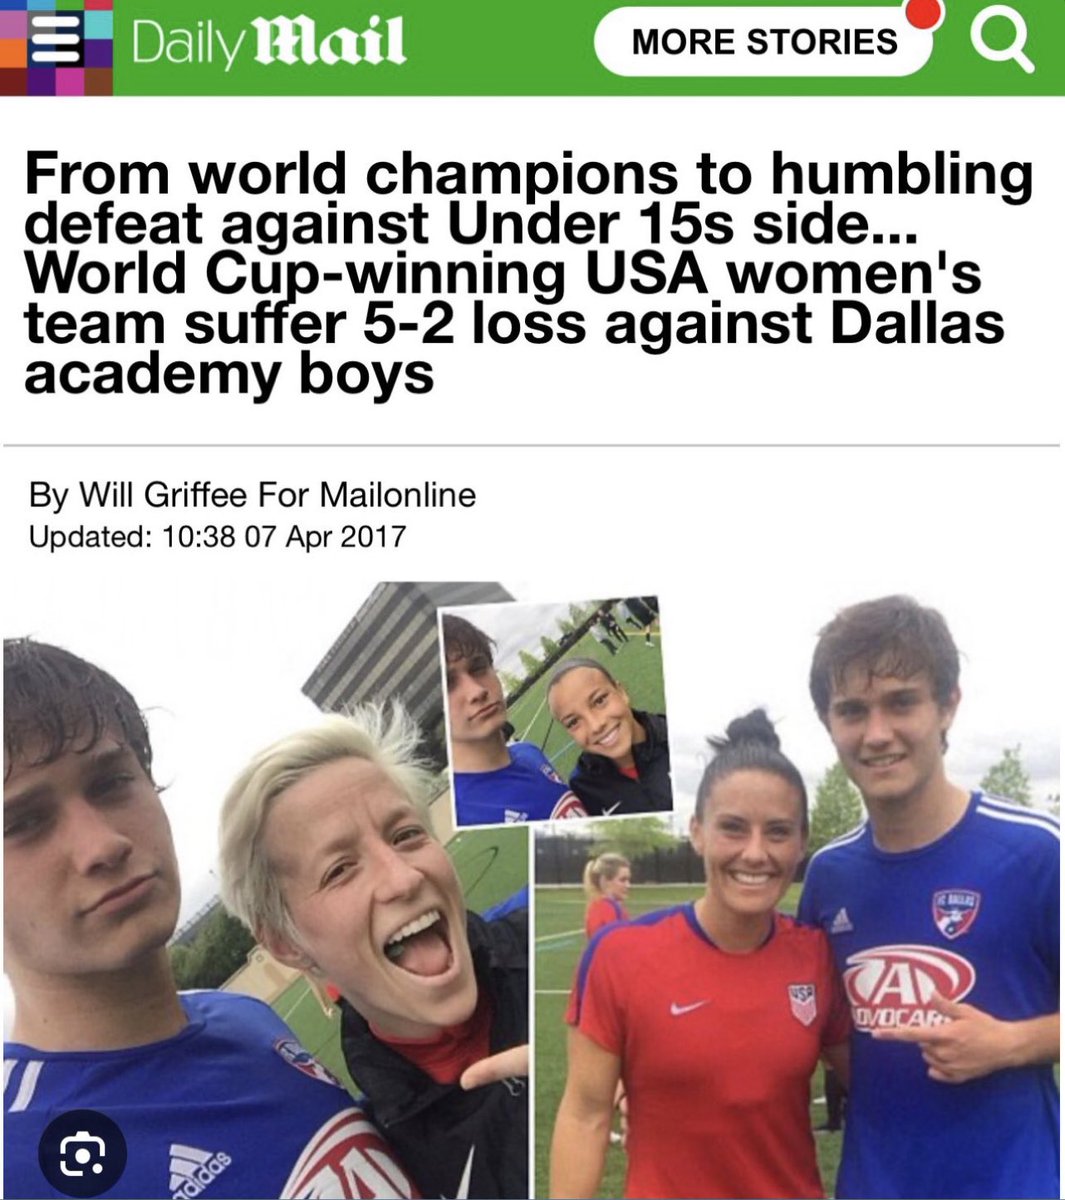 Im 💯 sure every elite female athlete who signed that letter knows v well the sport performance difference between males & females. We have likely all trained with sub elite males & even 14 y/o boys👇 Pulling up that ladder behind you is no good look @mPinoe, @S10Bird, @sincy12.